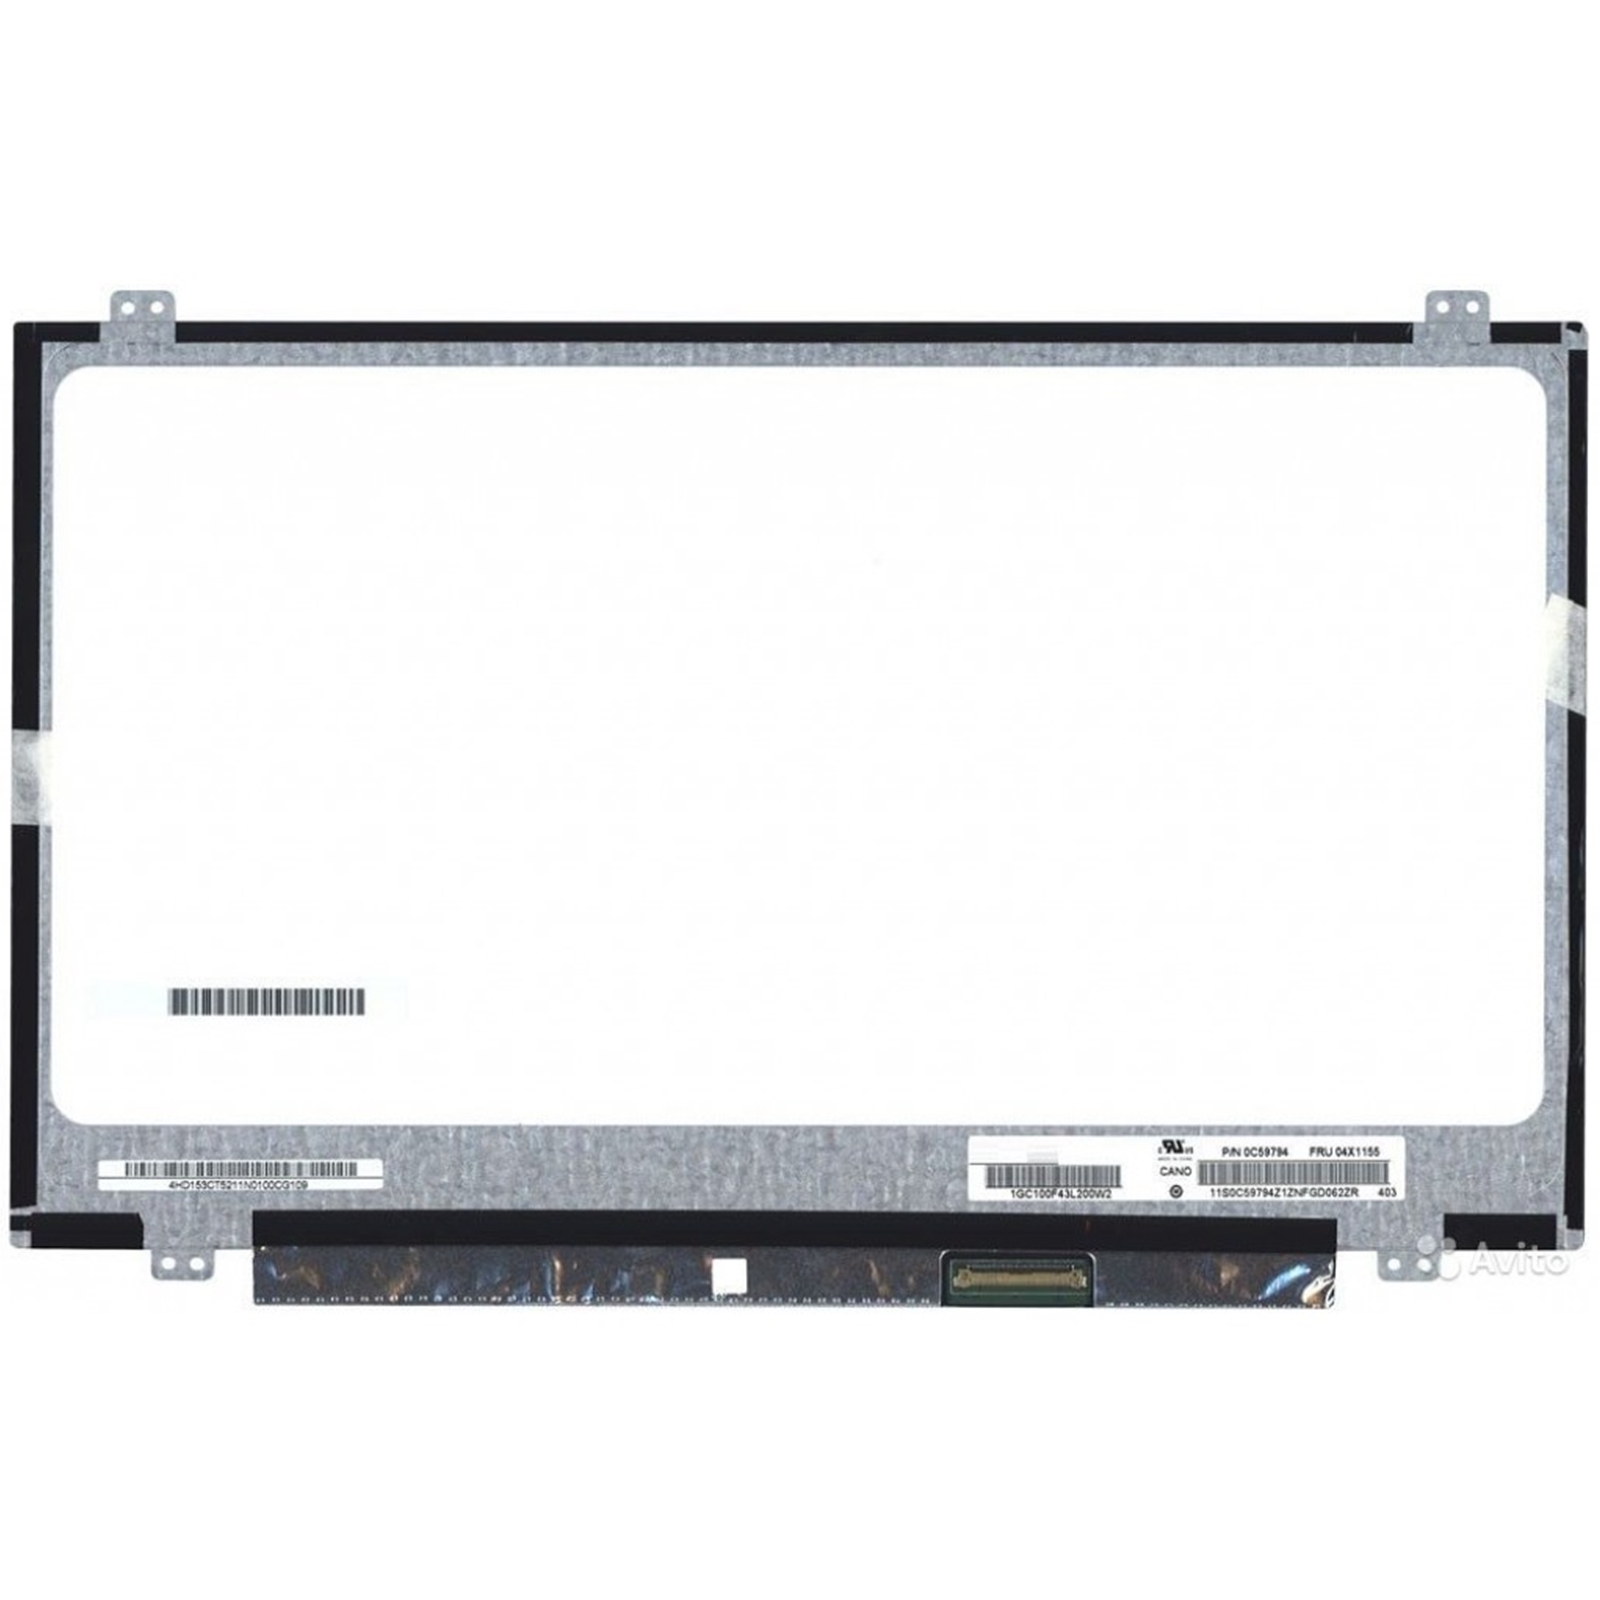 Innolux N140BGE-L43 14 Inch HD 1366x768 Replacement Laptop Screen, 40 Pin Socket, Includes Brackets, Glossy